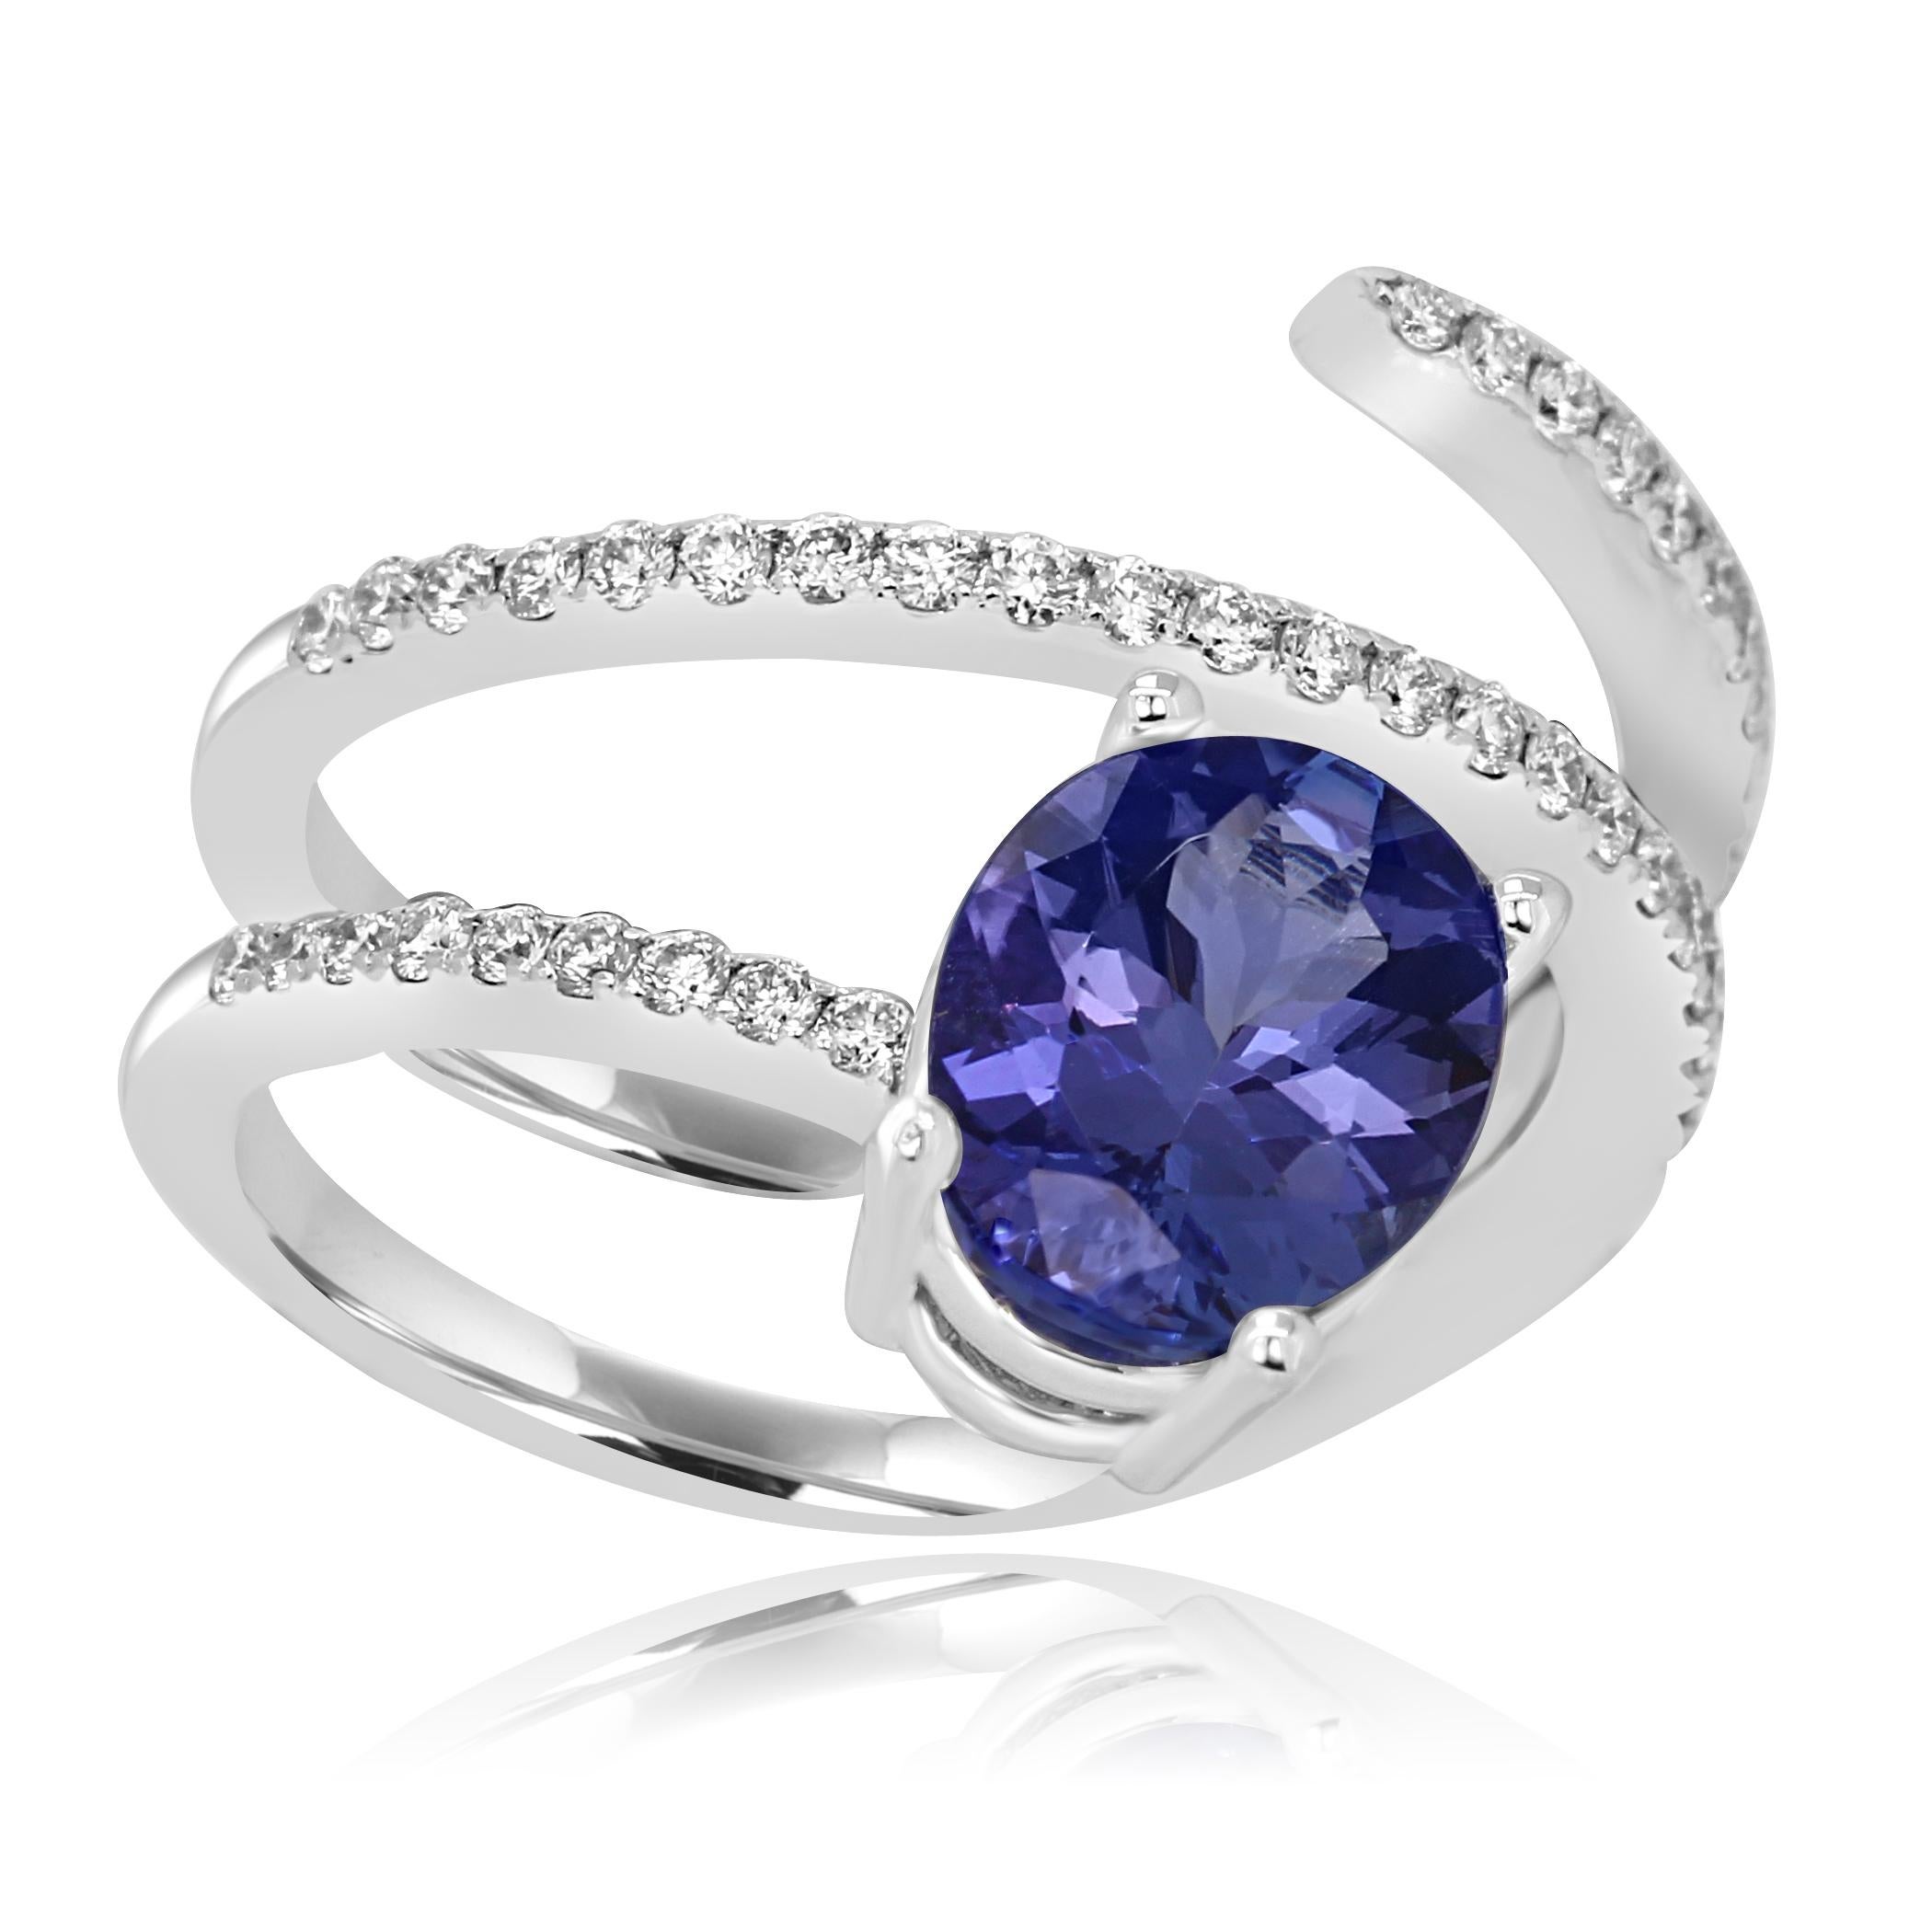  Beautiful Tanzanite Oval 1.90 Carat set  with White Diamond Rounds 0.33 carat in 14K White Gold Cocktail Spiral Ring.

MADE IN USA

Tanzanite Oval Center Weight 1.90 Carat
Total Weight 2.23 Carat 